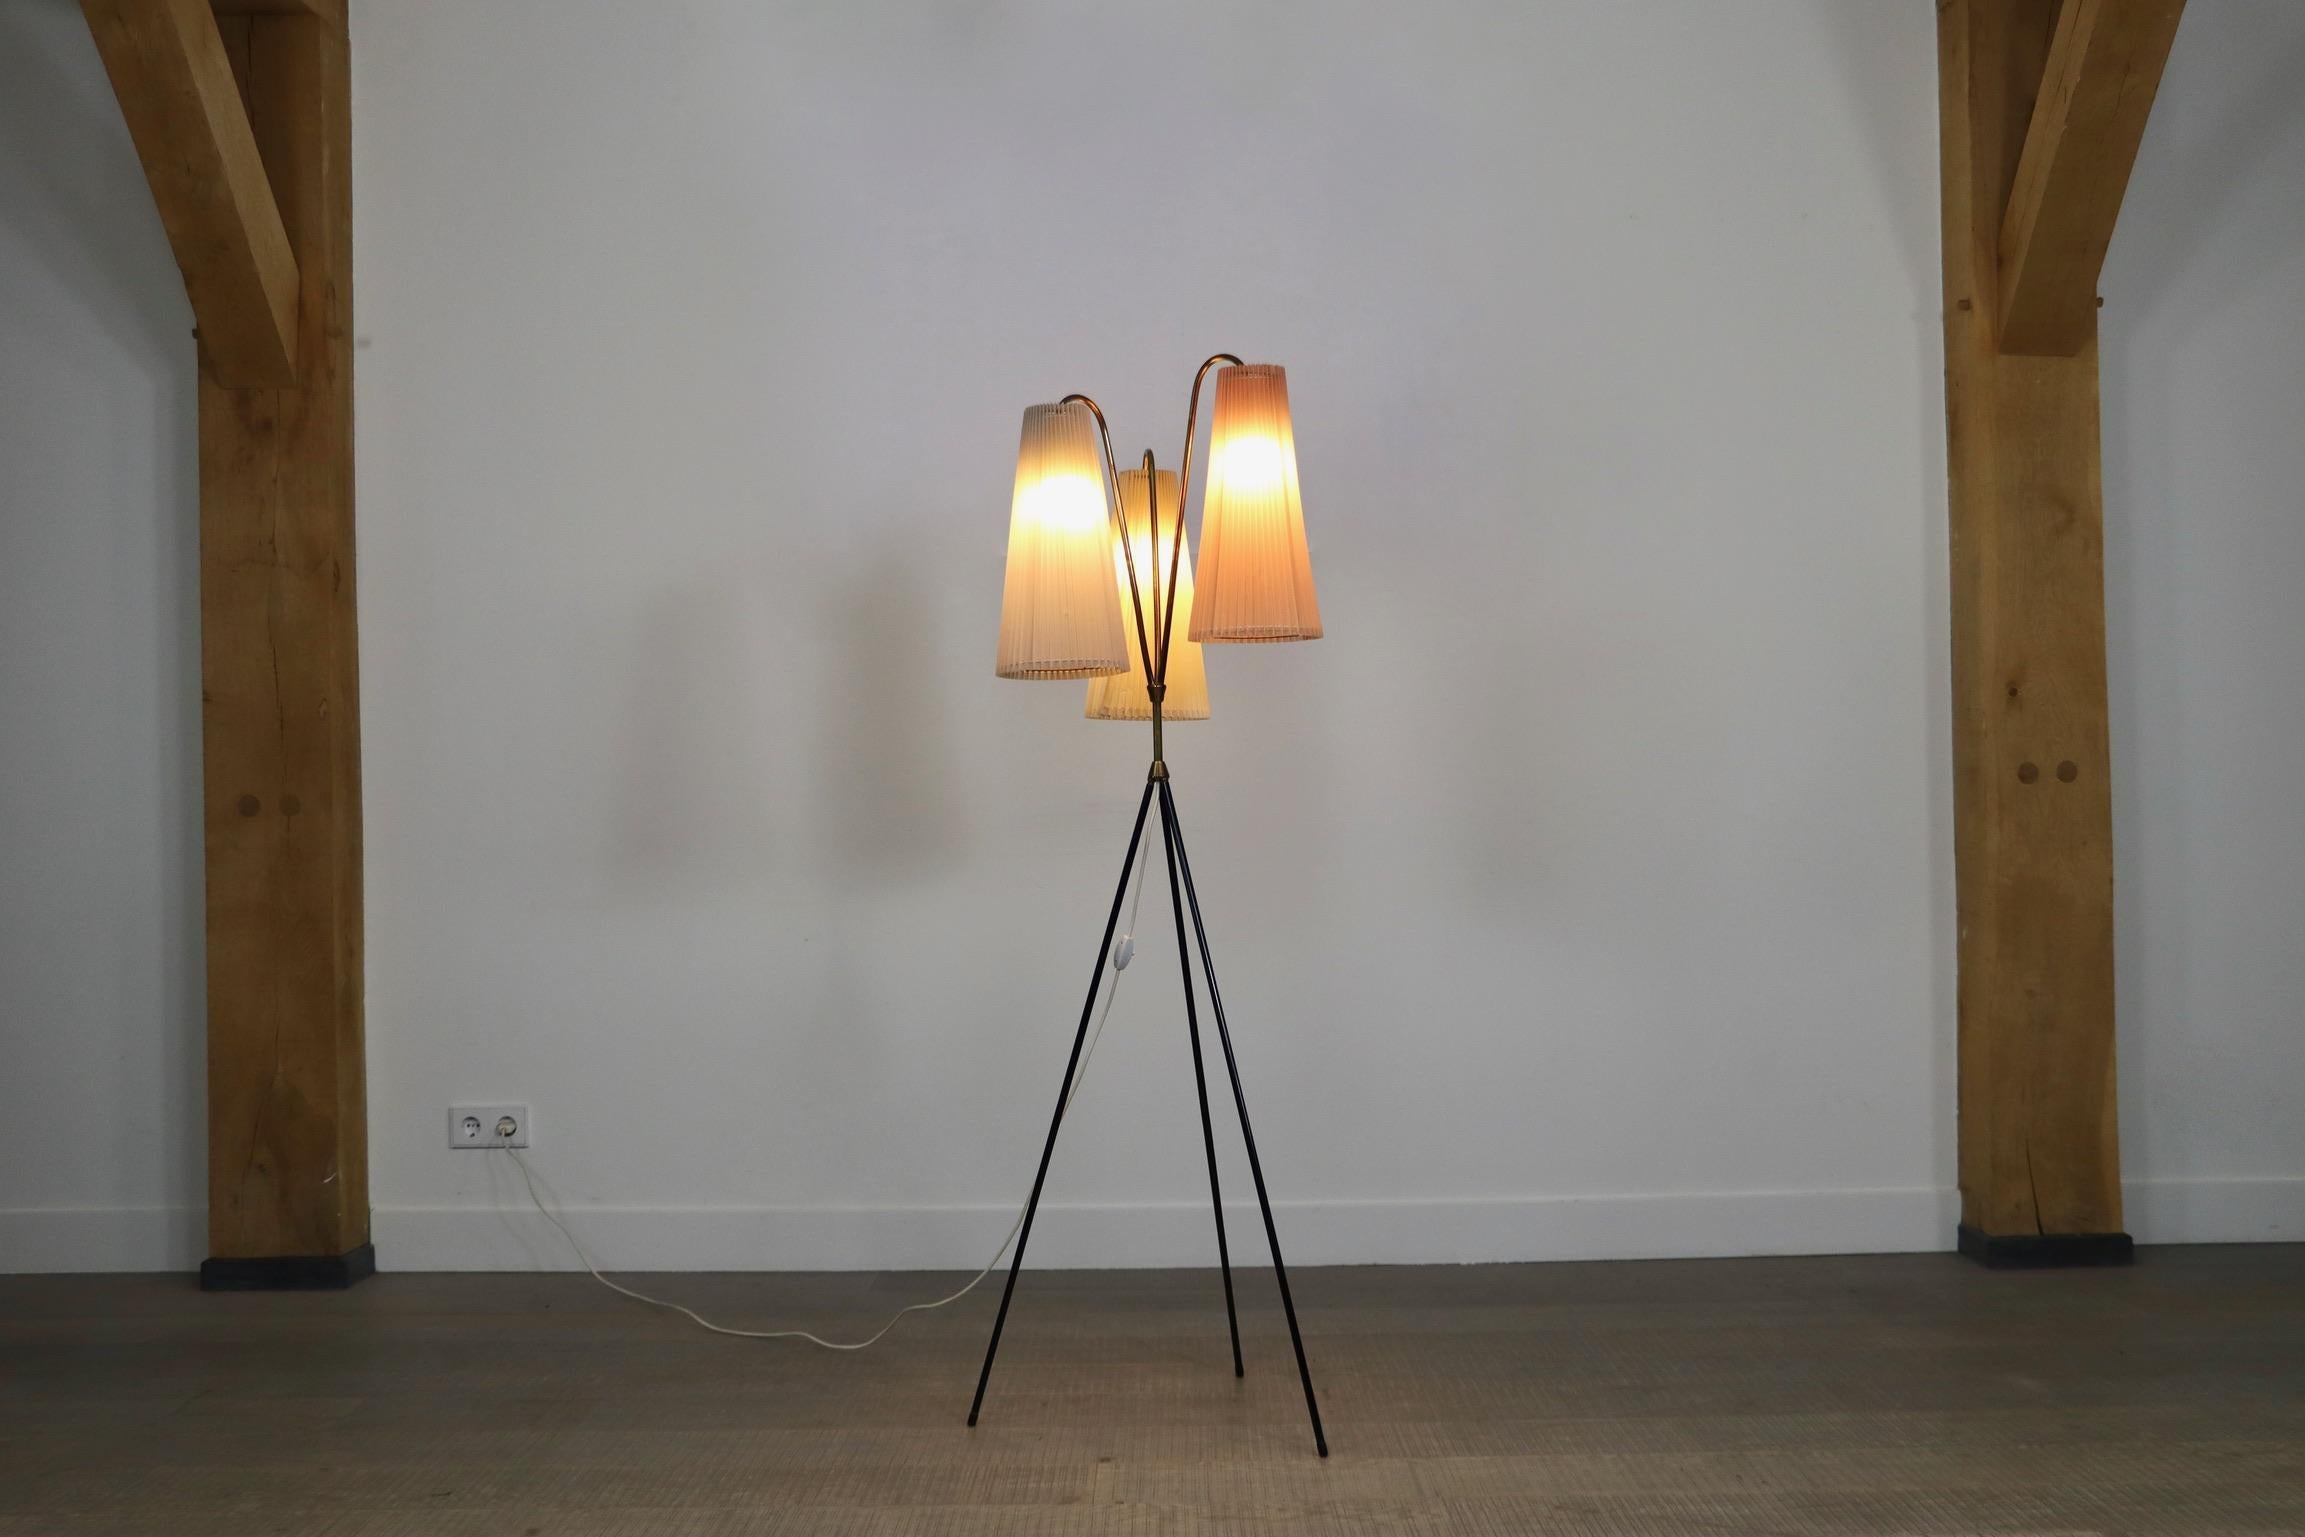 Beautiful vintage Tripod floor lamp in brass and plisse lamp shades in pastel peach, off-white and cream. The warm light this unique lamp gives, creates a welcome feeling in any space. Tested and ready for use. Can be fully disassembled for